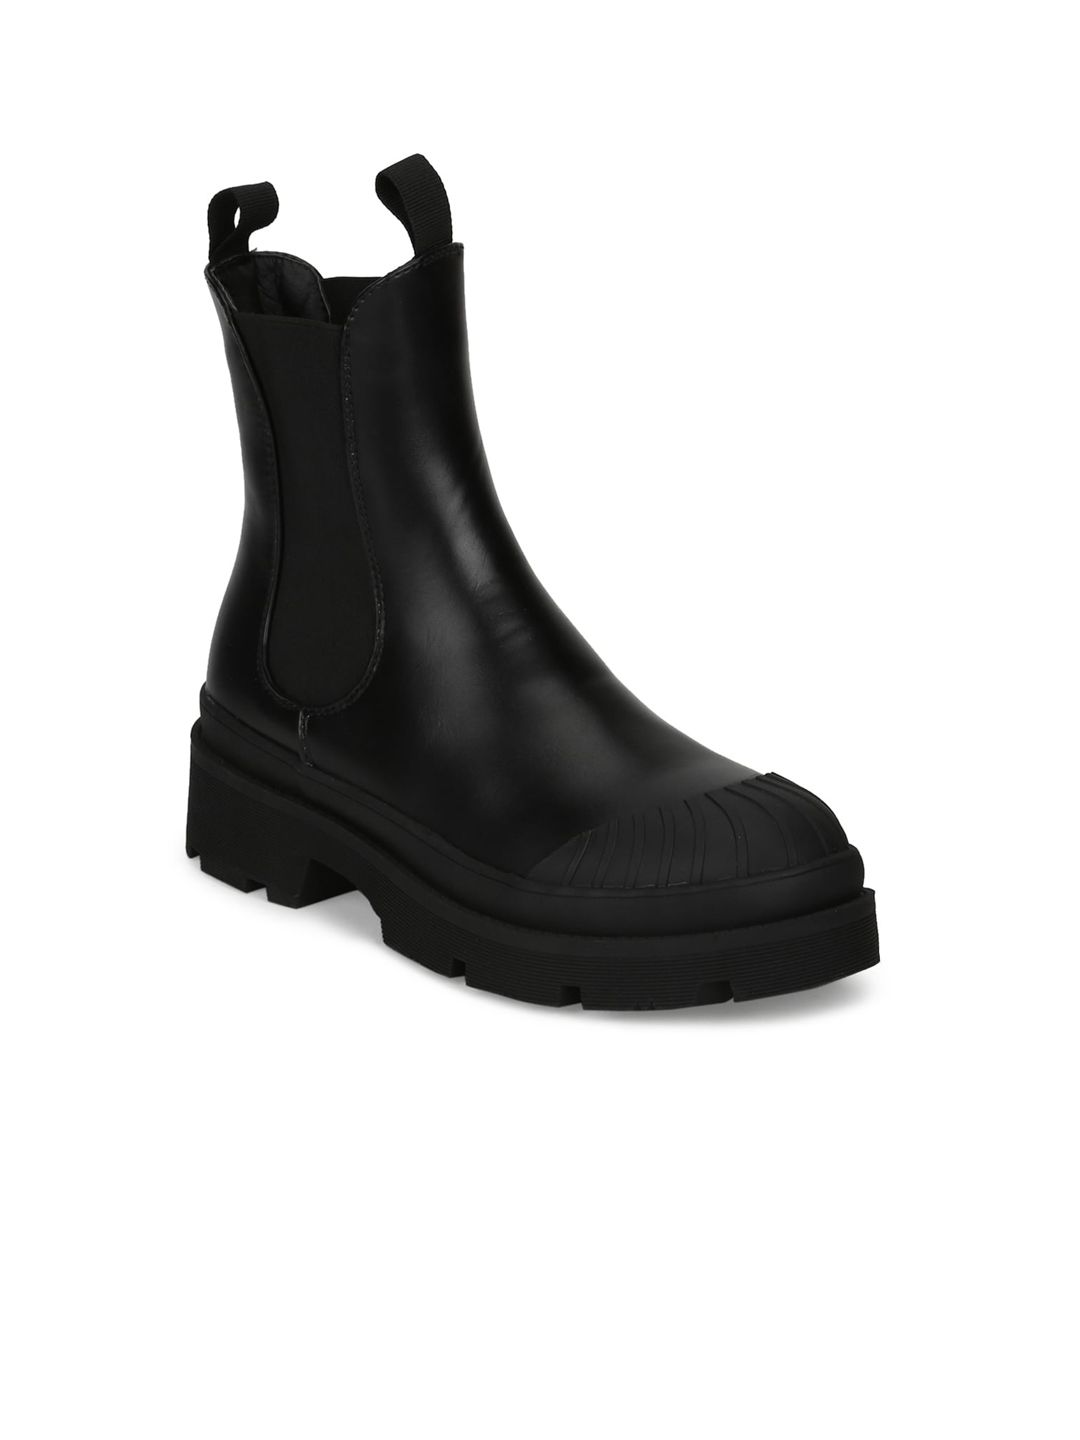 Truffle Collection Black PU Comfort Heeled Boots Price in India